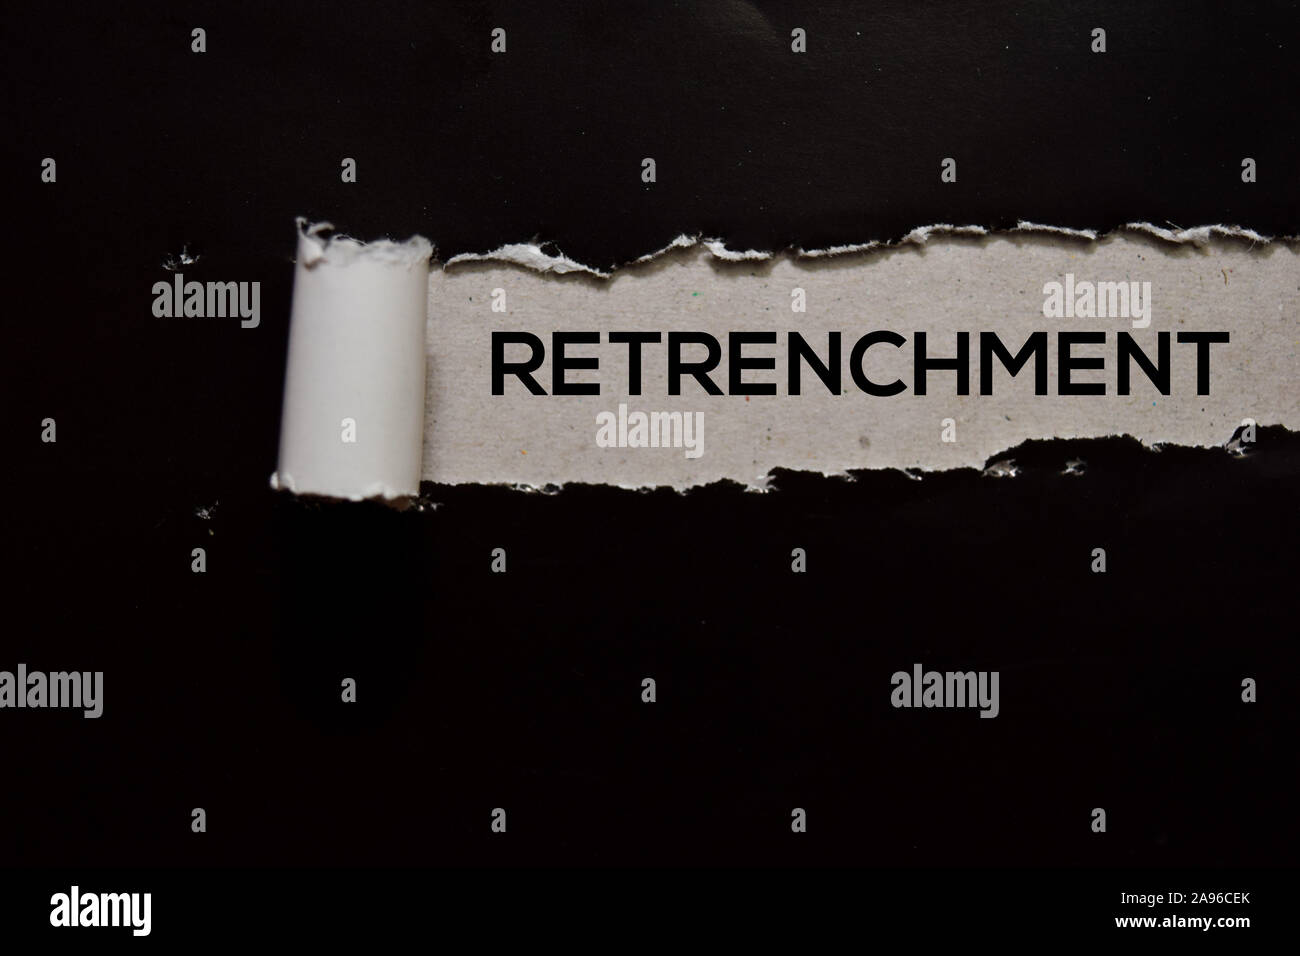 Retrenchement Text written in torn paper Stock Photo